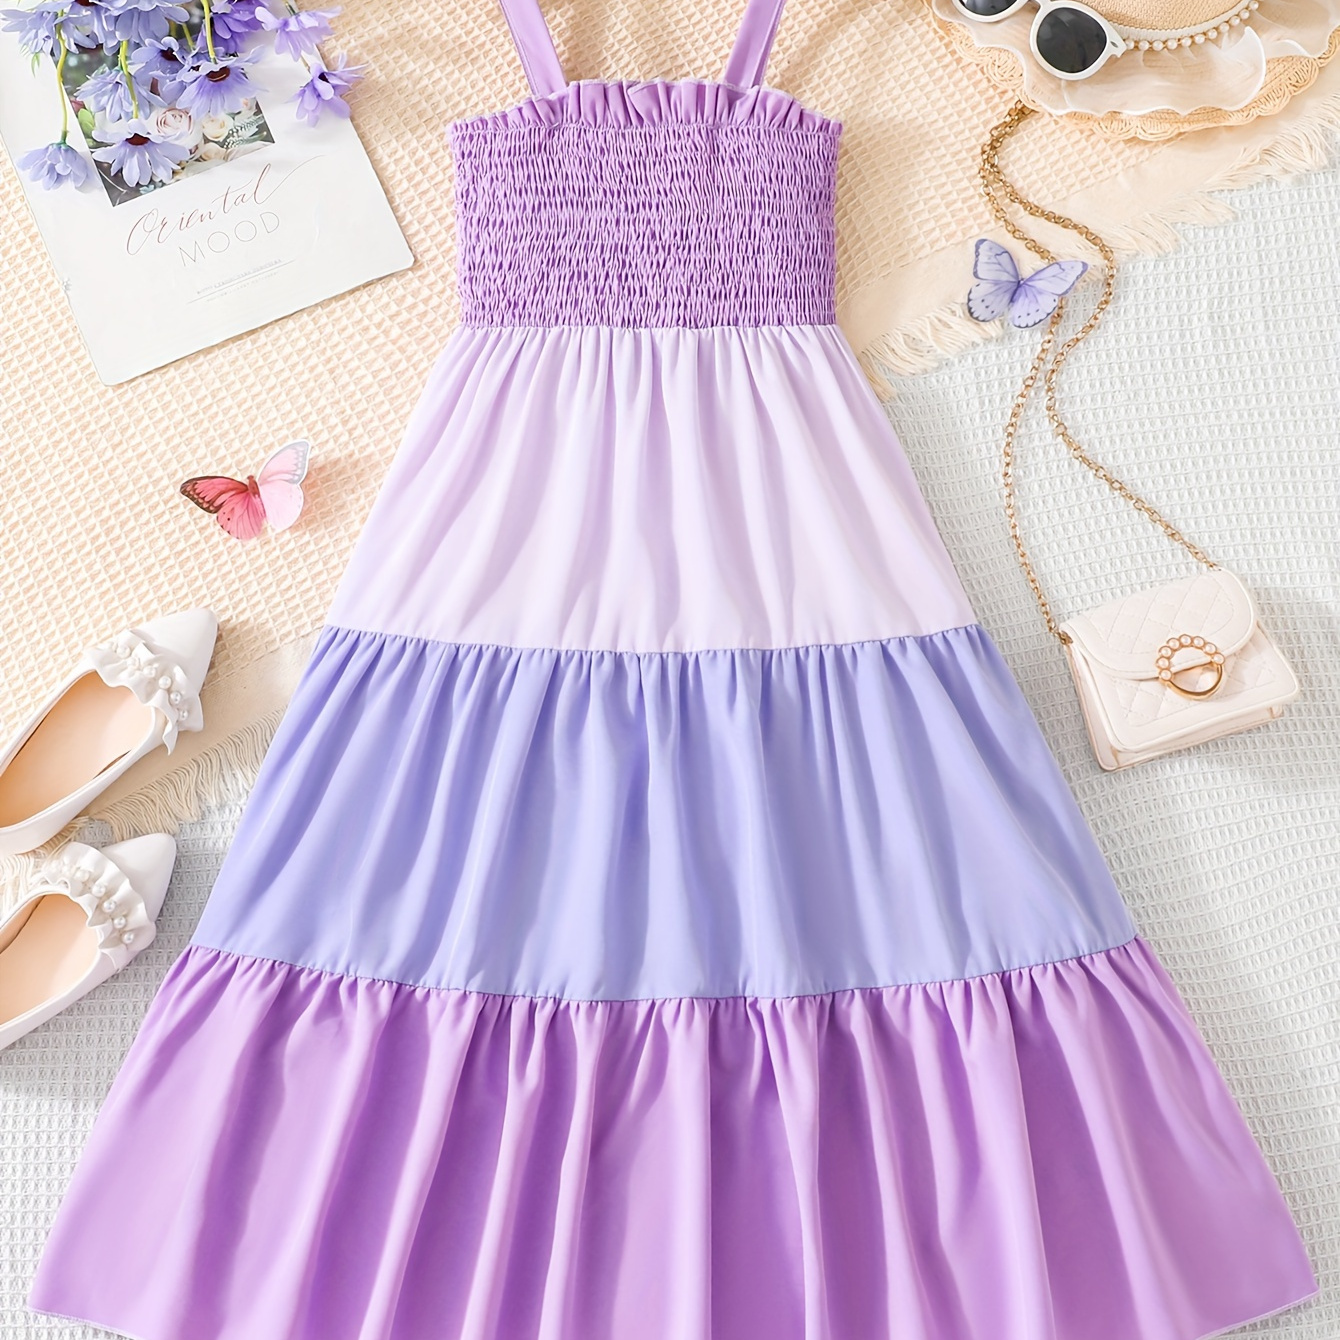 

Color Spliced Swing Fit Suspender Dress For Girls, Summer Going Out Holiday Casual Dresses, Gift Idea